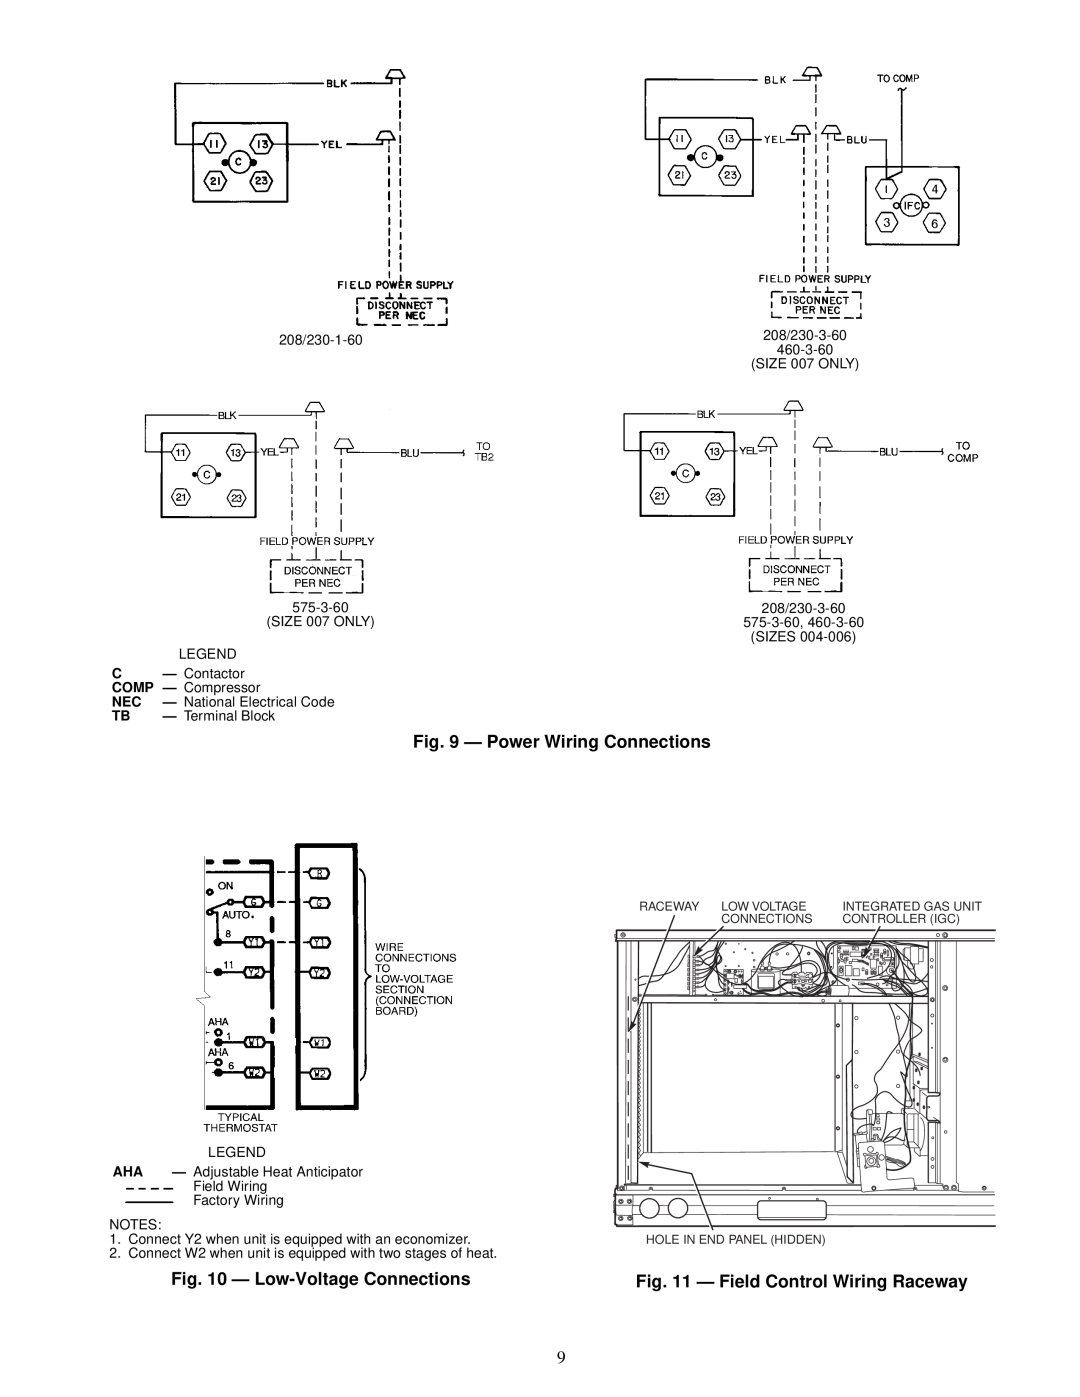 Carrier 48TF004-007 specifications Power Wiring Connections, Low-VoltageConnections, Field Control Wiring Raceway 